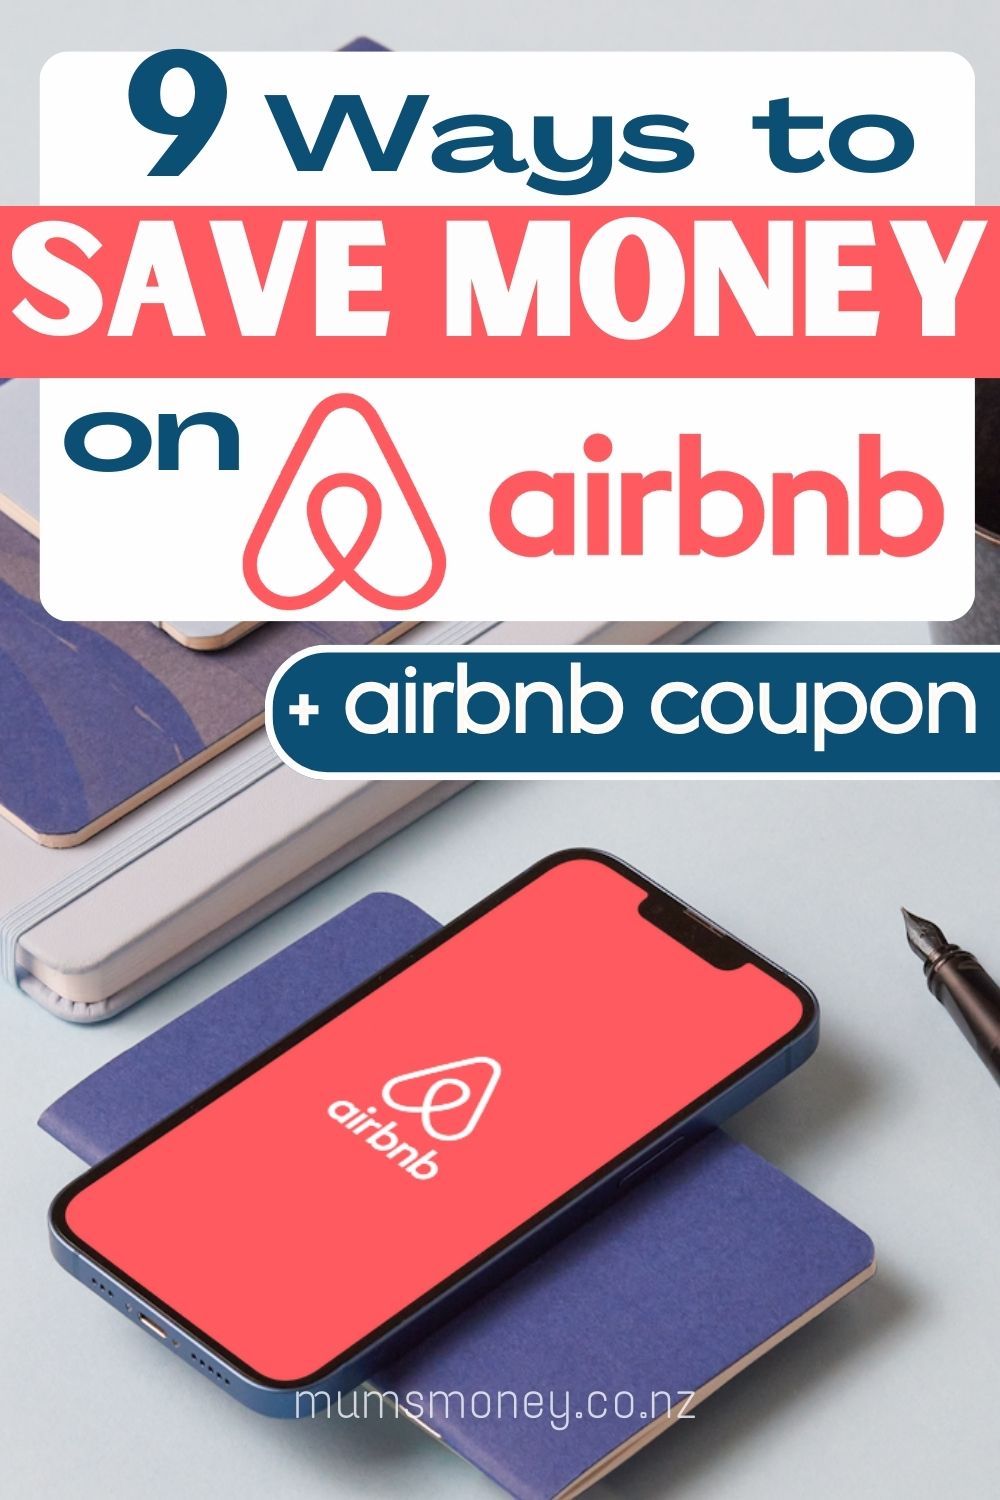  Ways to Save Money on Airbnb